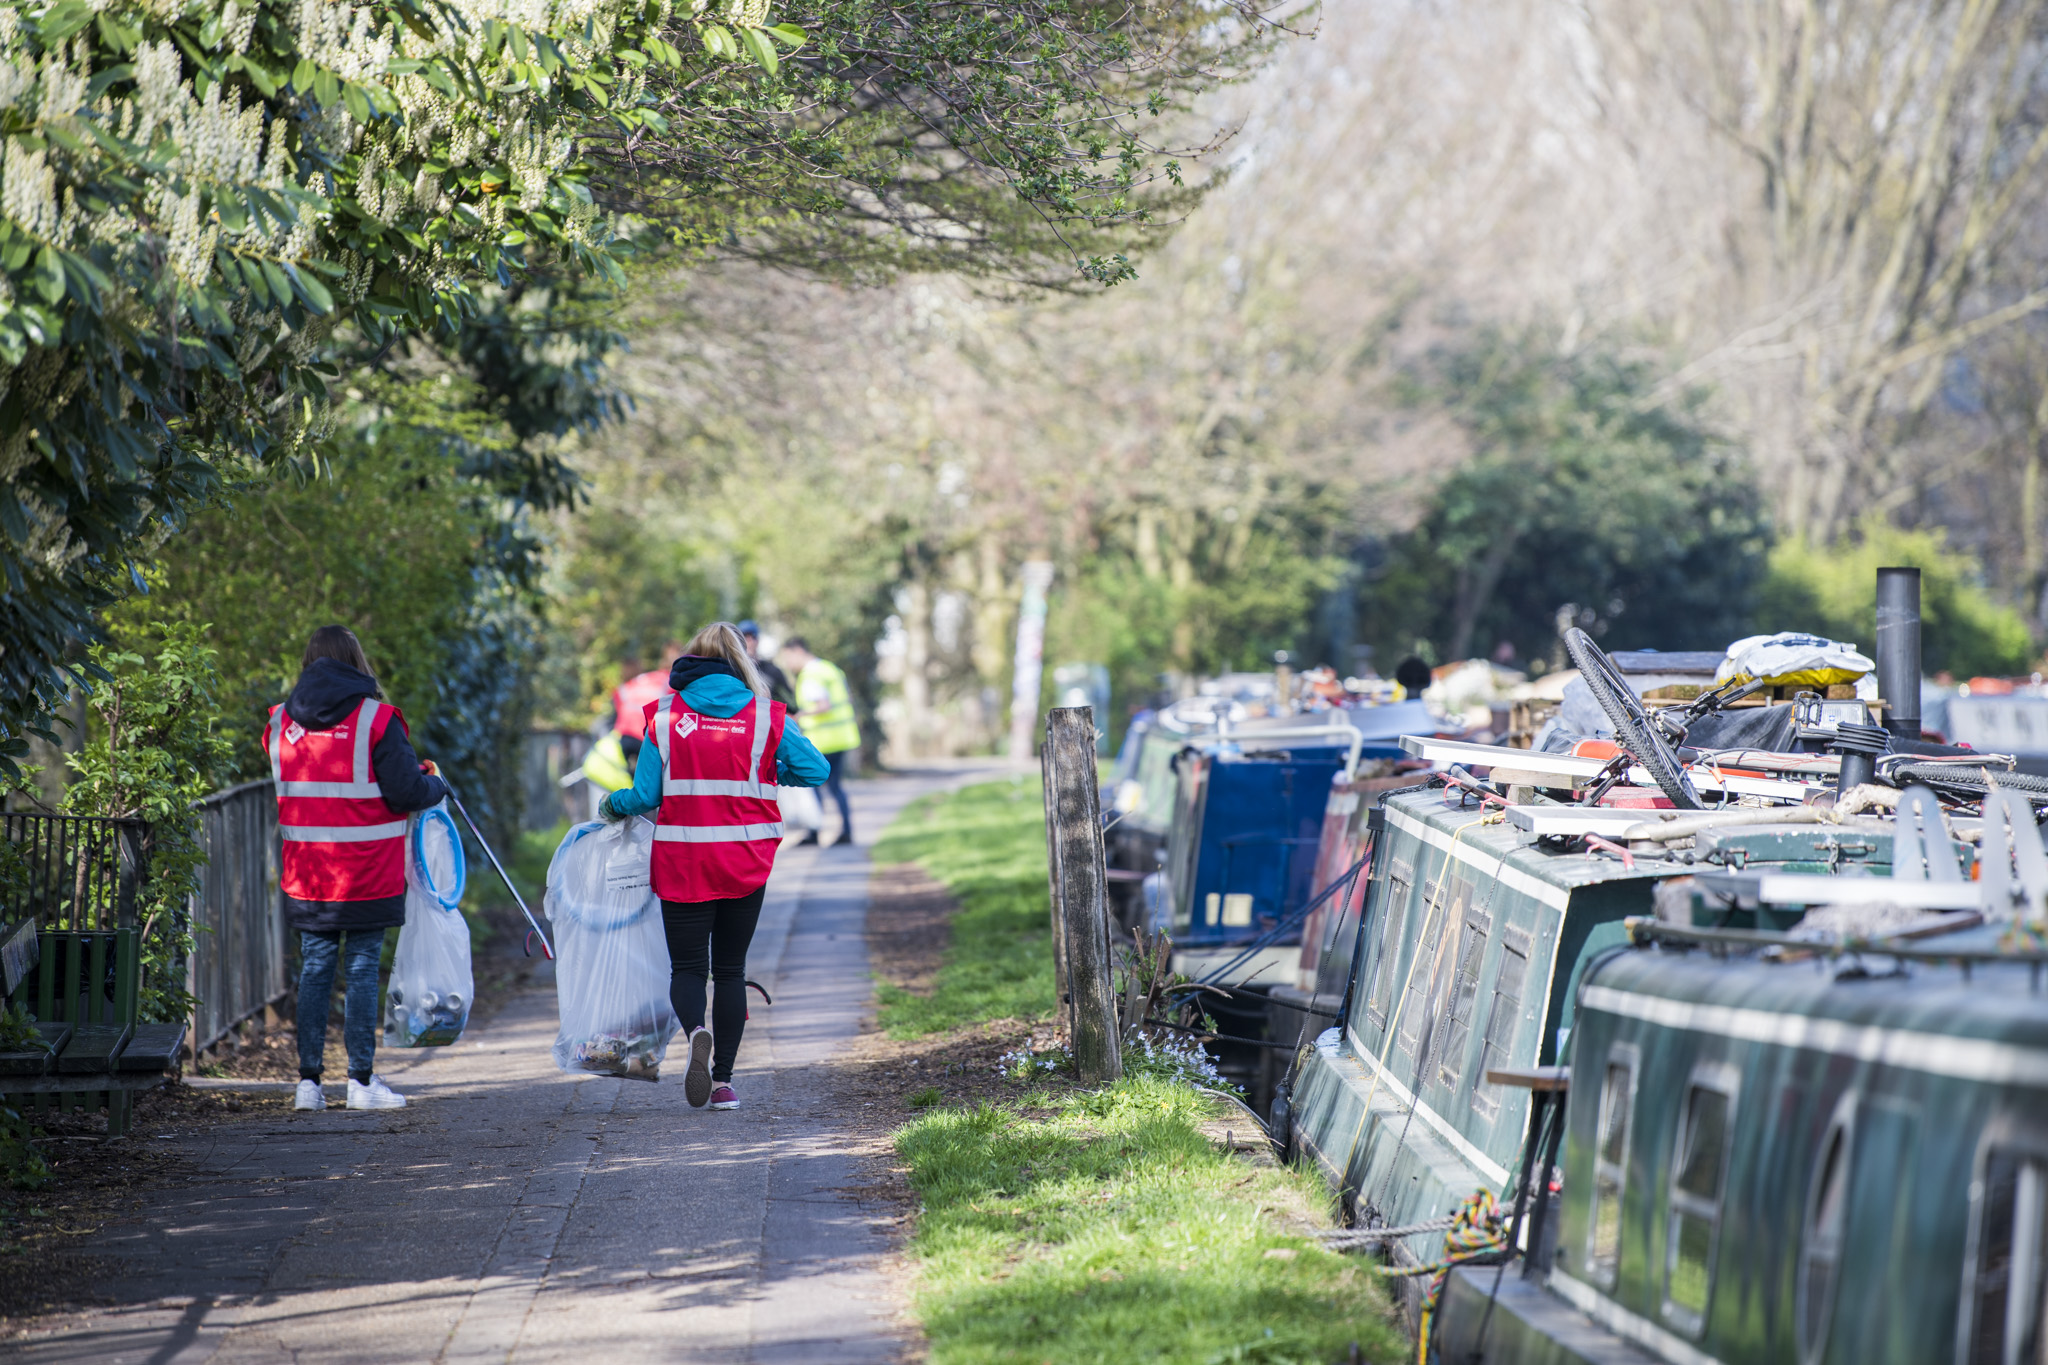 An image of a litter pick Grand Union Canal in Paddington